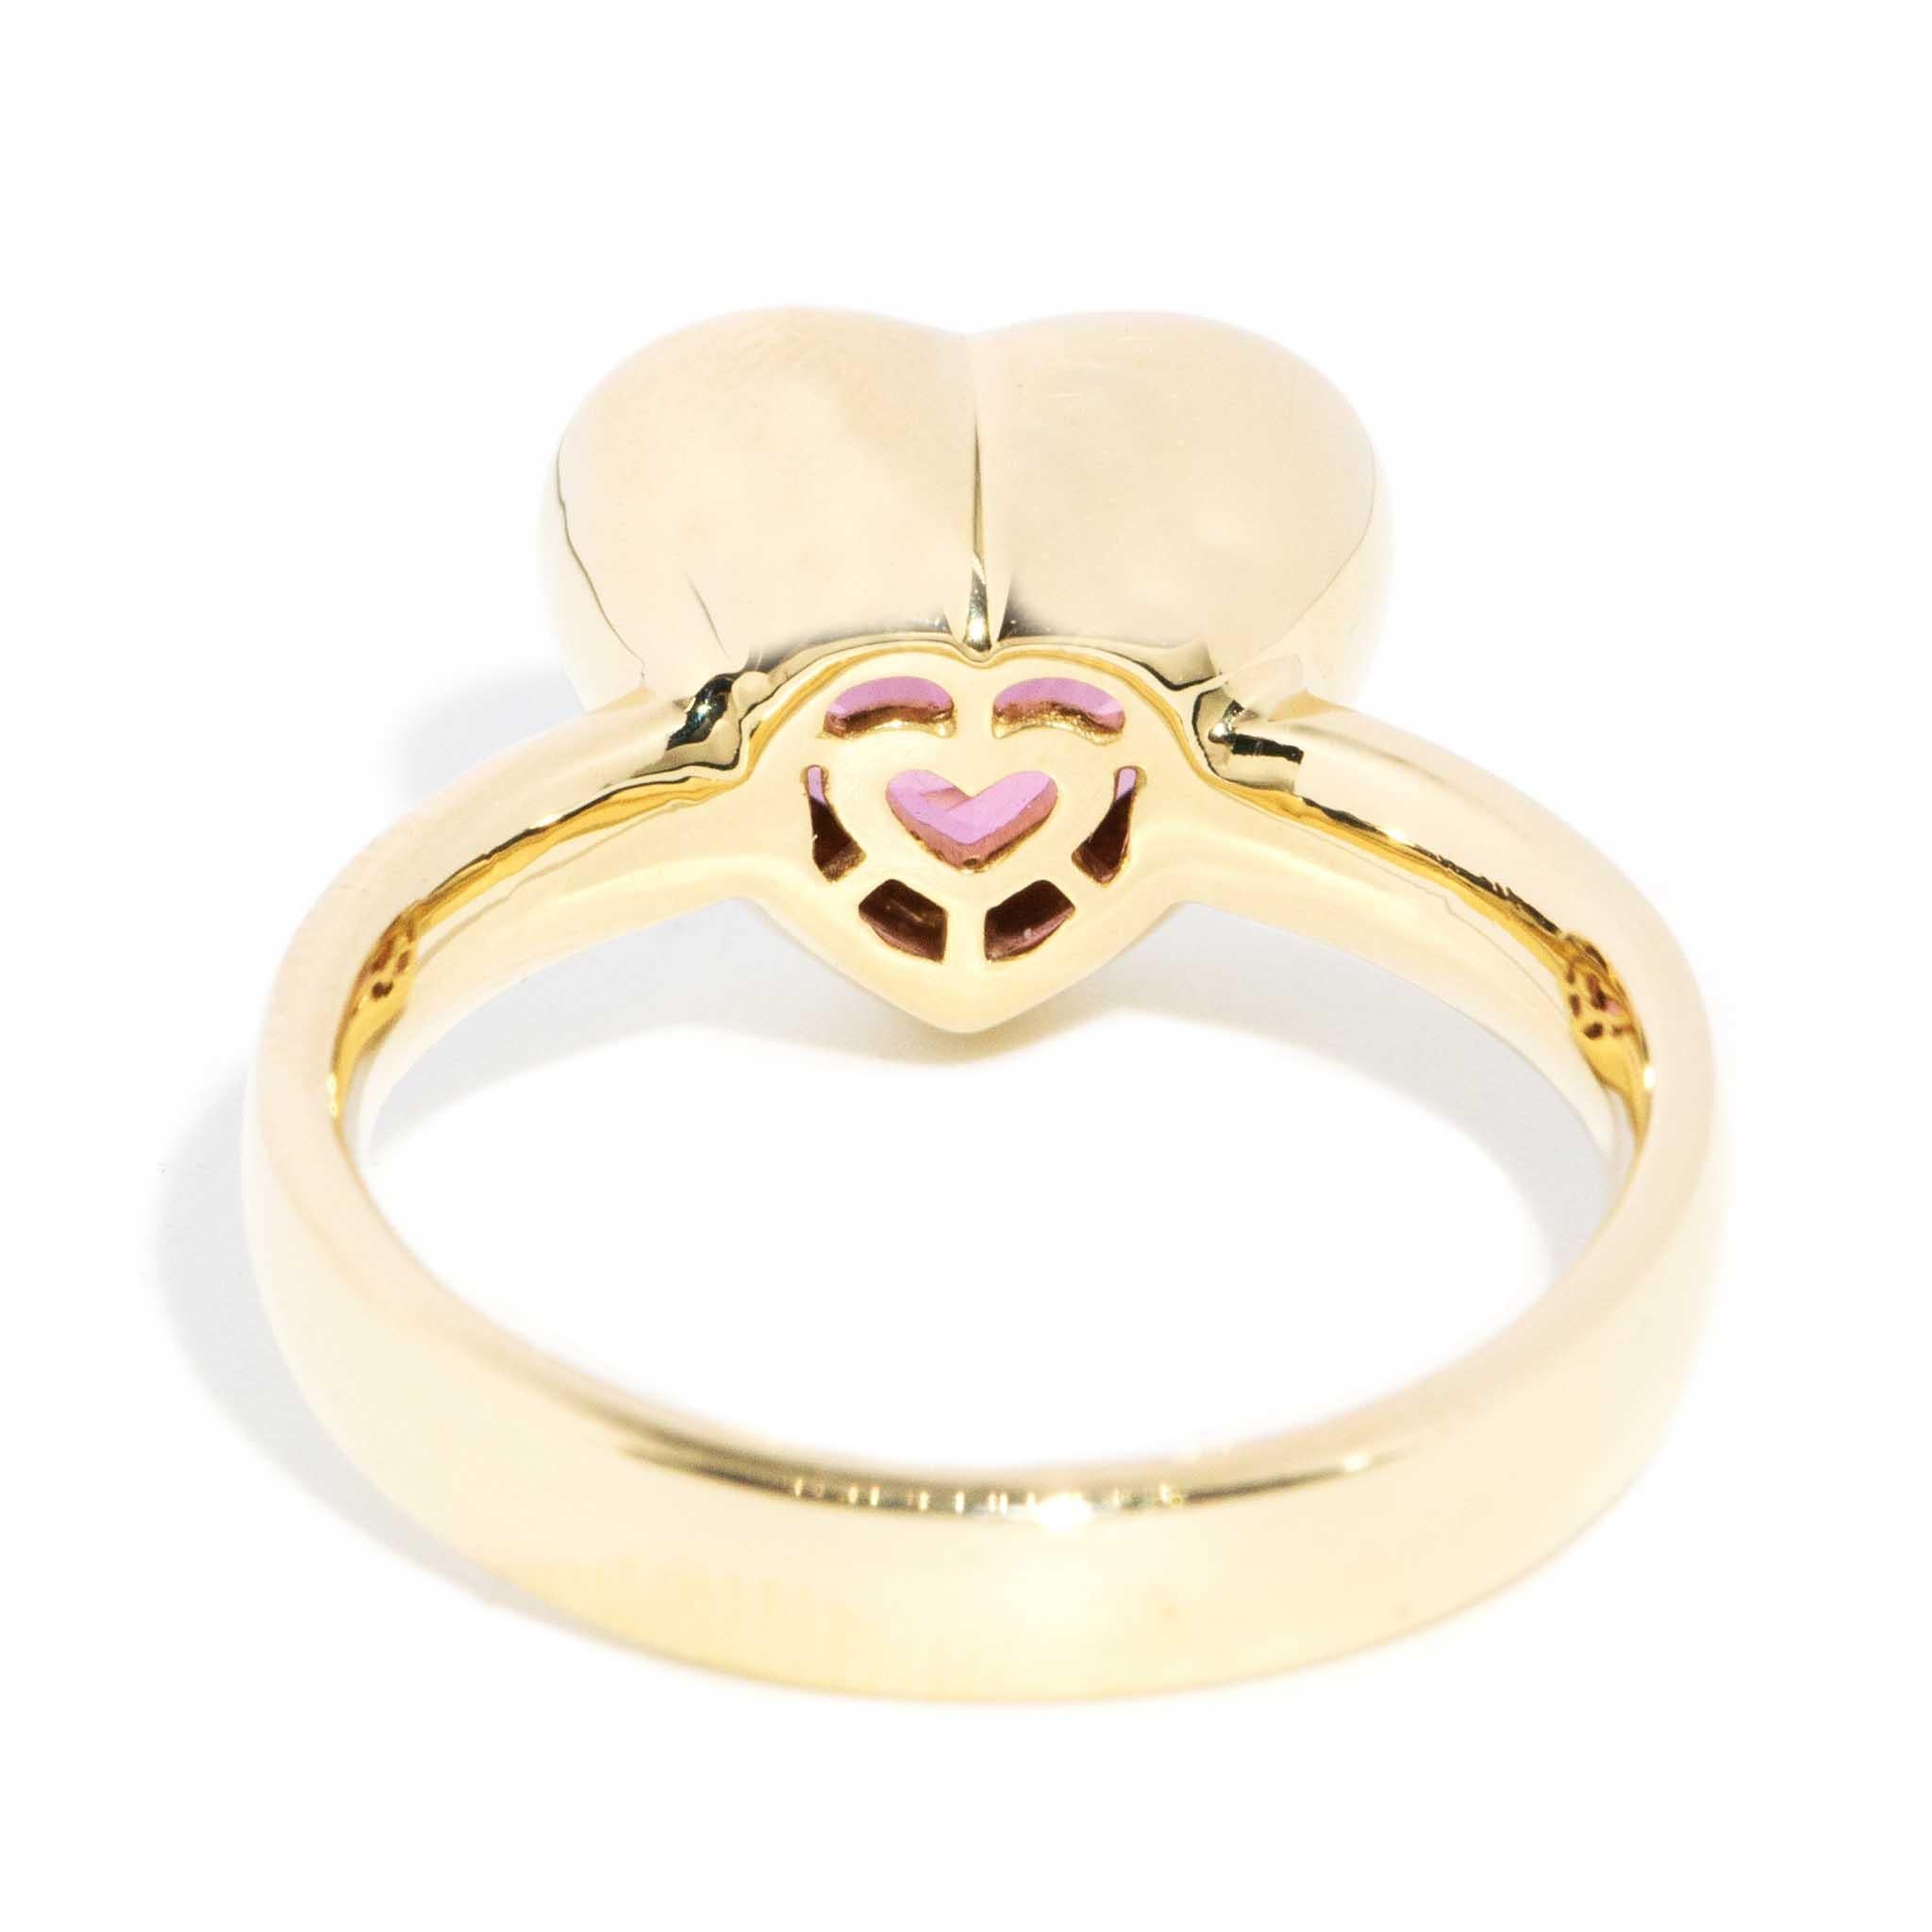 Contemporary Cerys 2.97 Carat Pink Tourmaline Heart Ring 18 Carat Gold For Sale 6